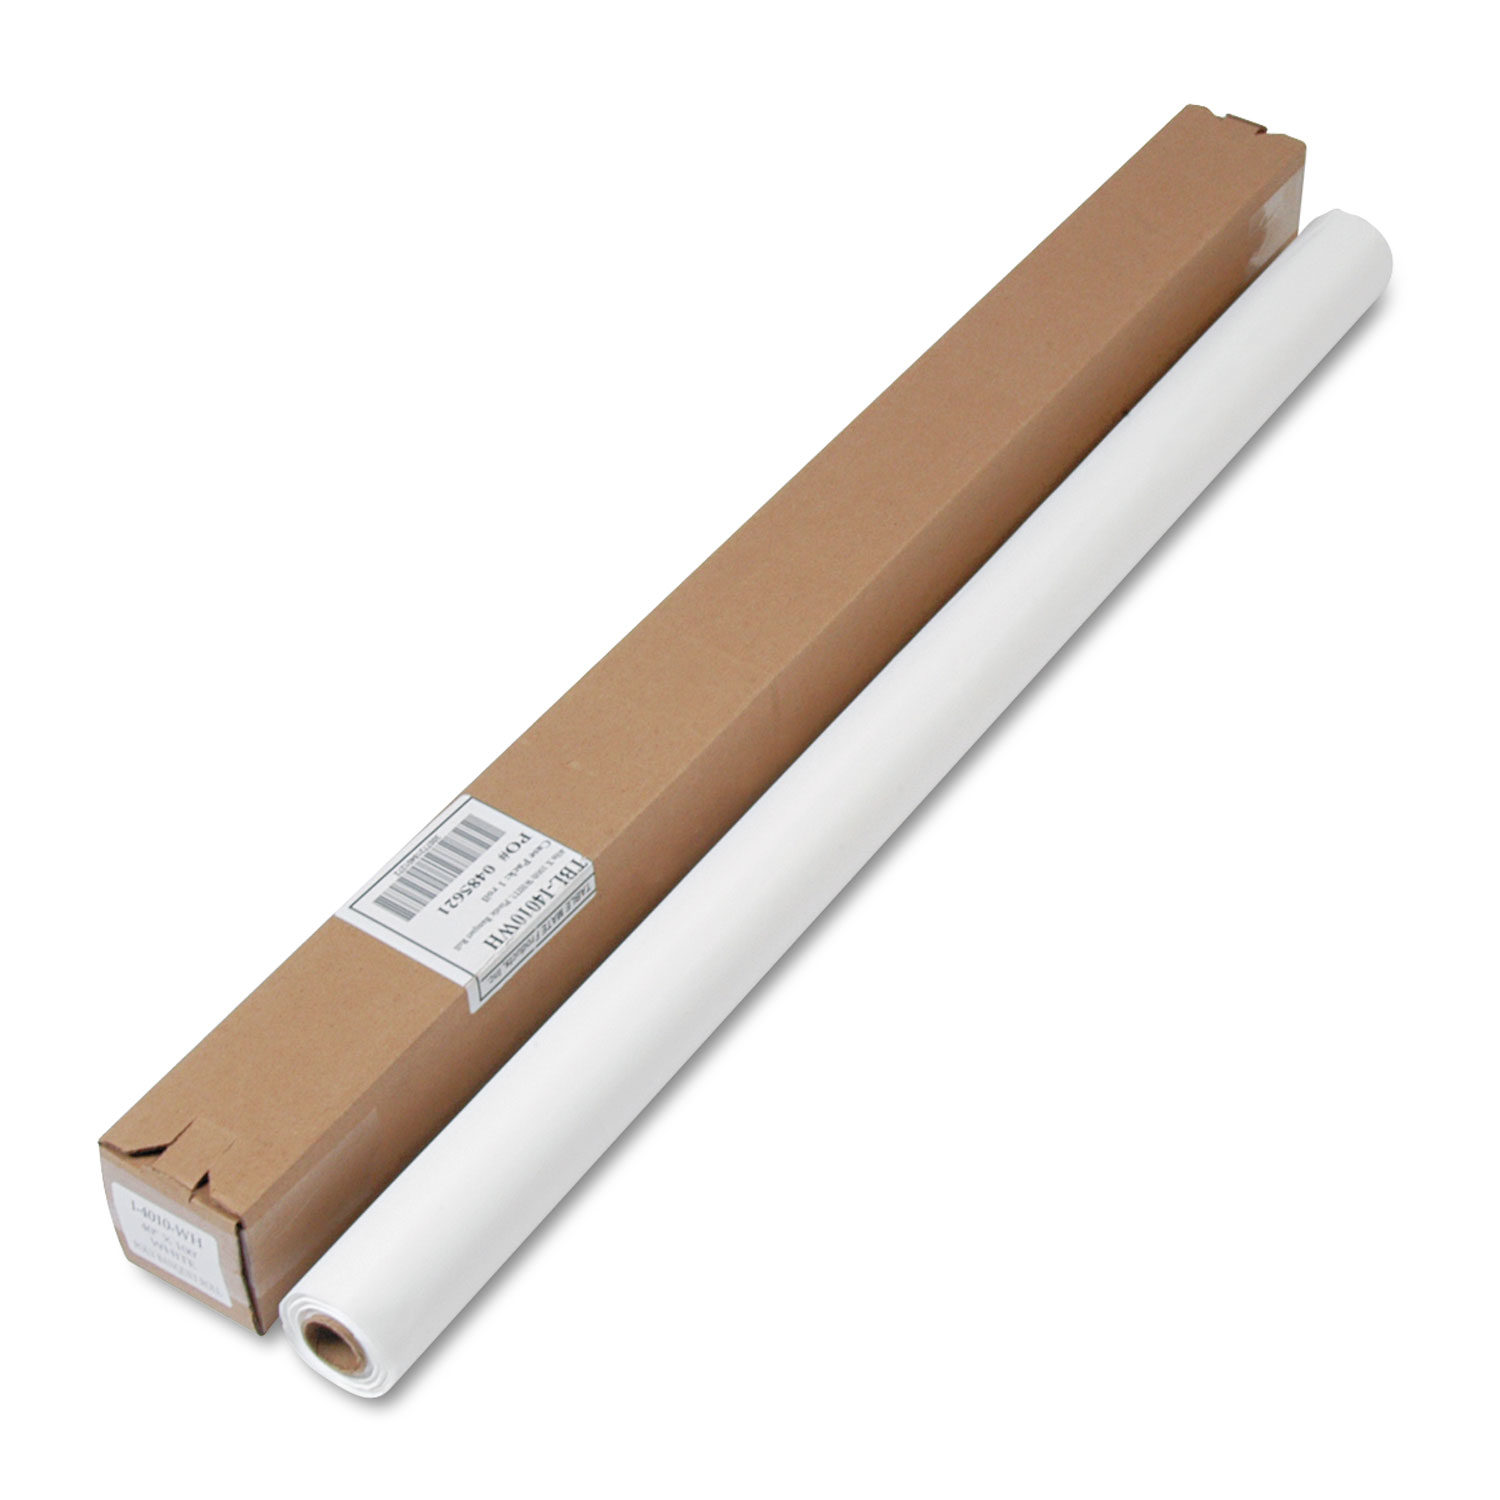 Tablemate TBLI4010WH Table Set Plastic Banquet Roll, Table Cover, 40" x 100ft, White